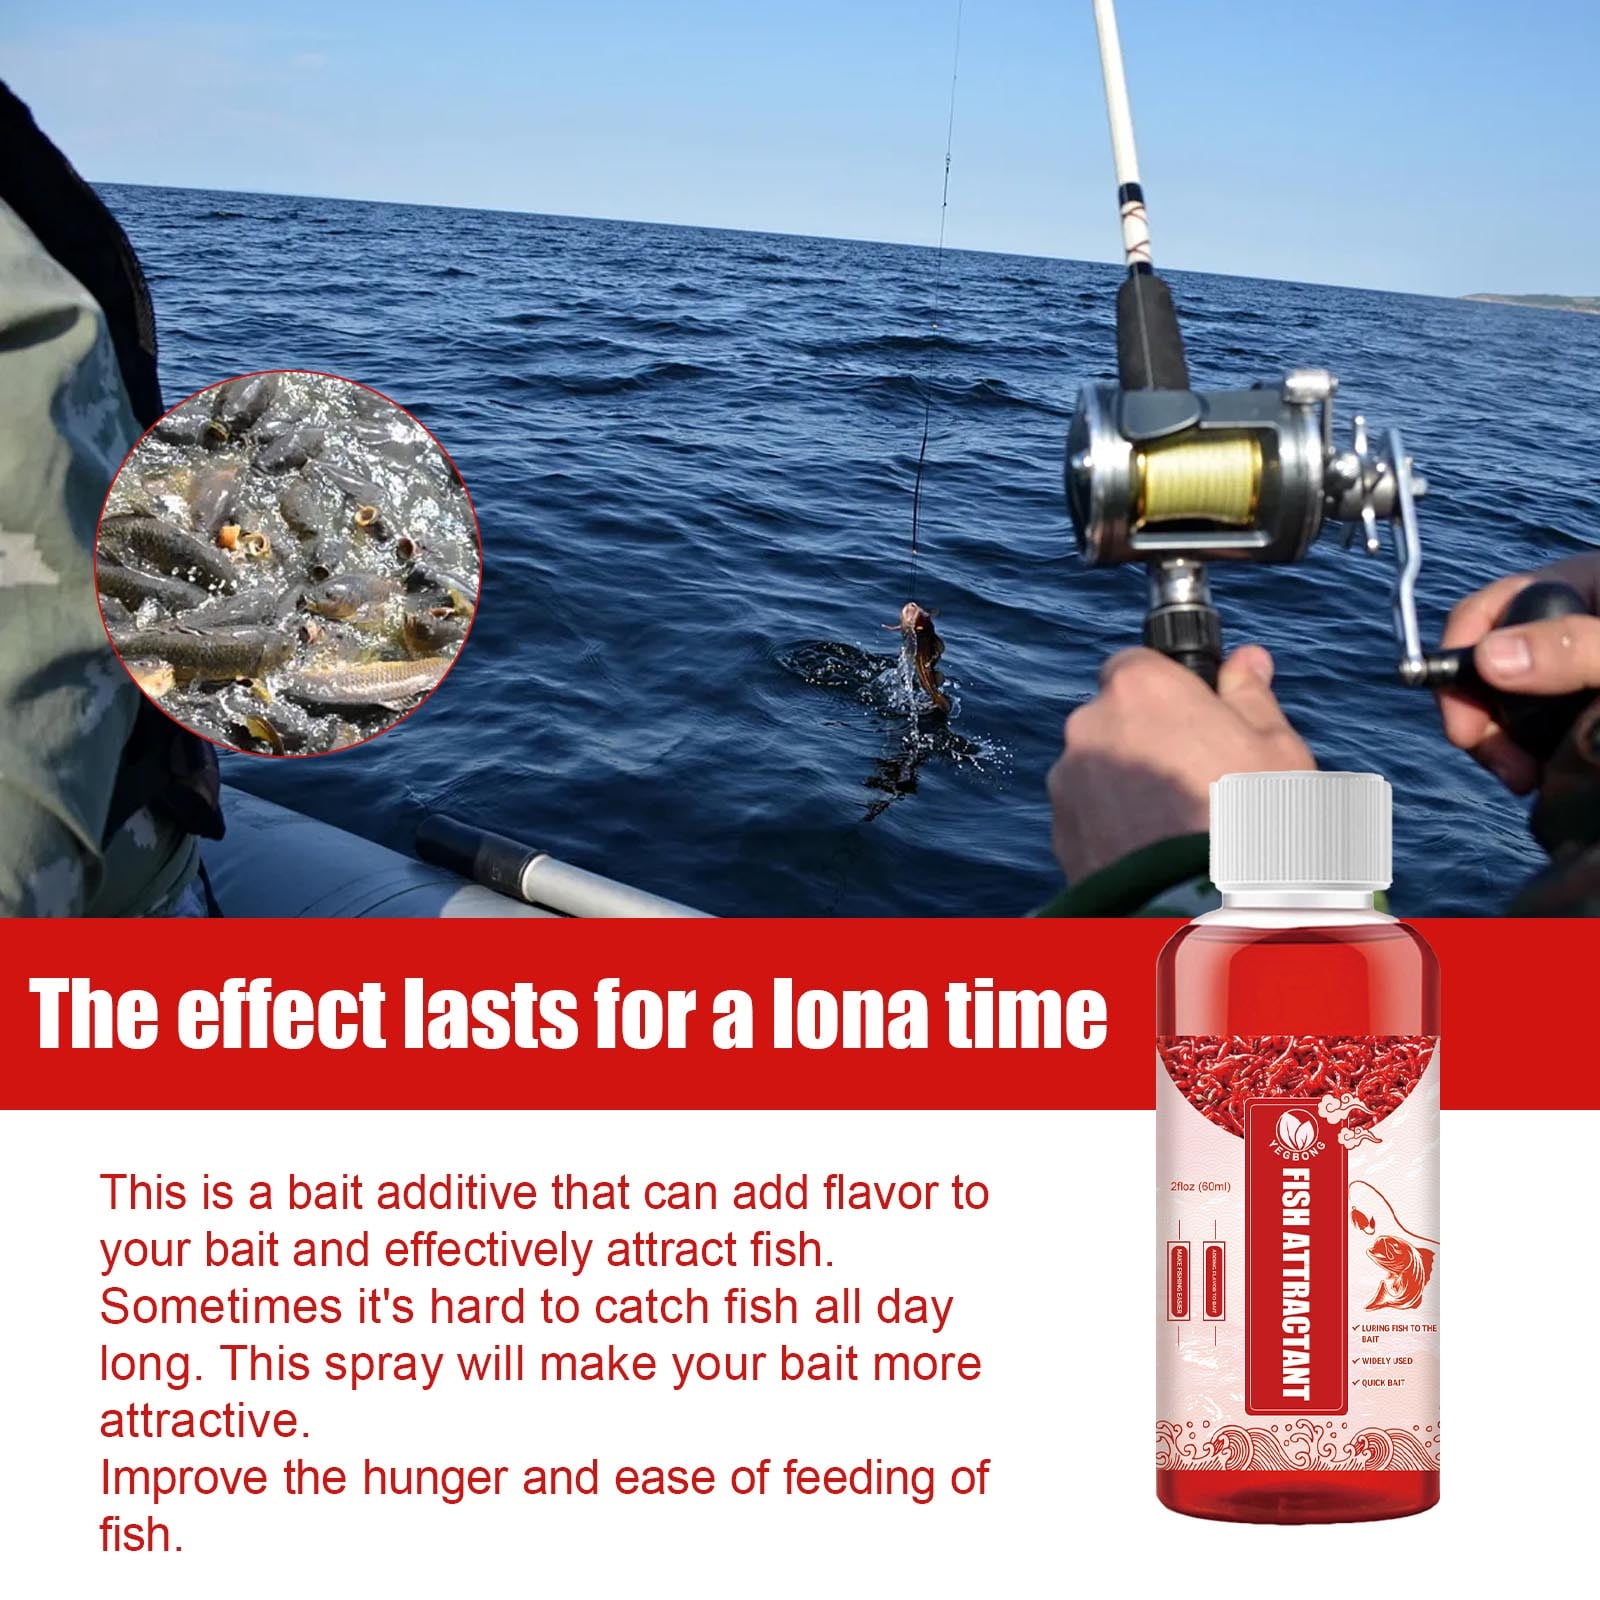 Replying to @psionicmoonglow Red 40 and fish explained!, worm juice  fishing